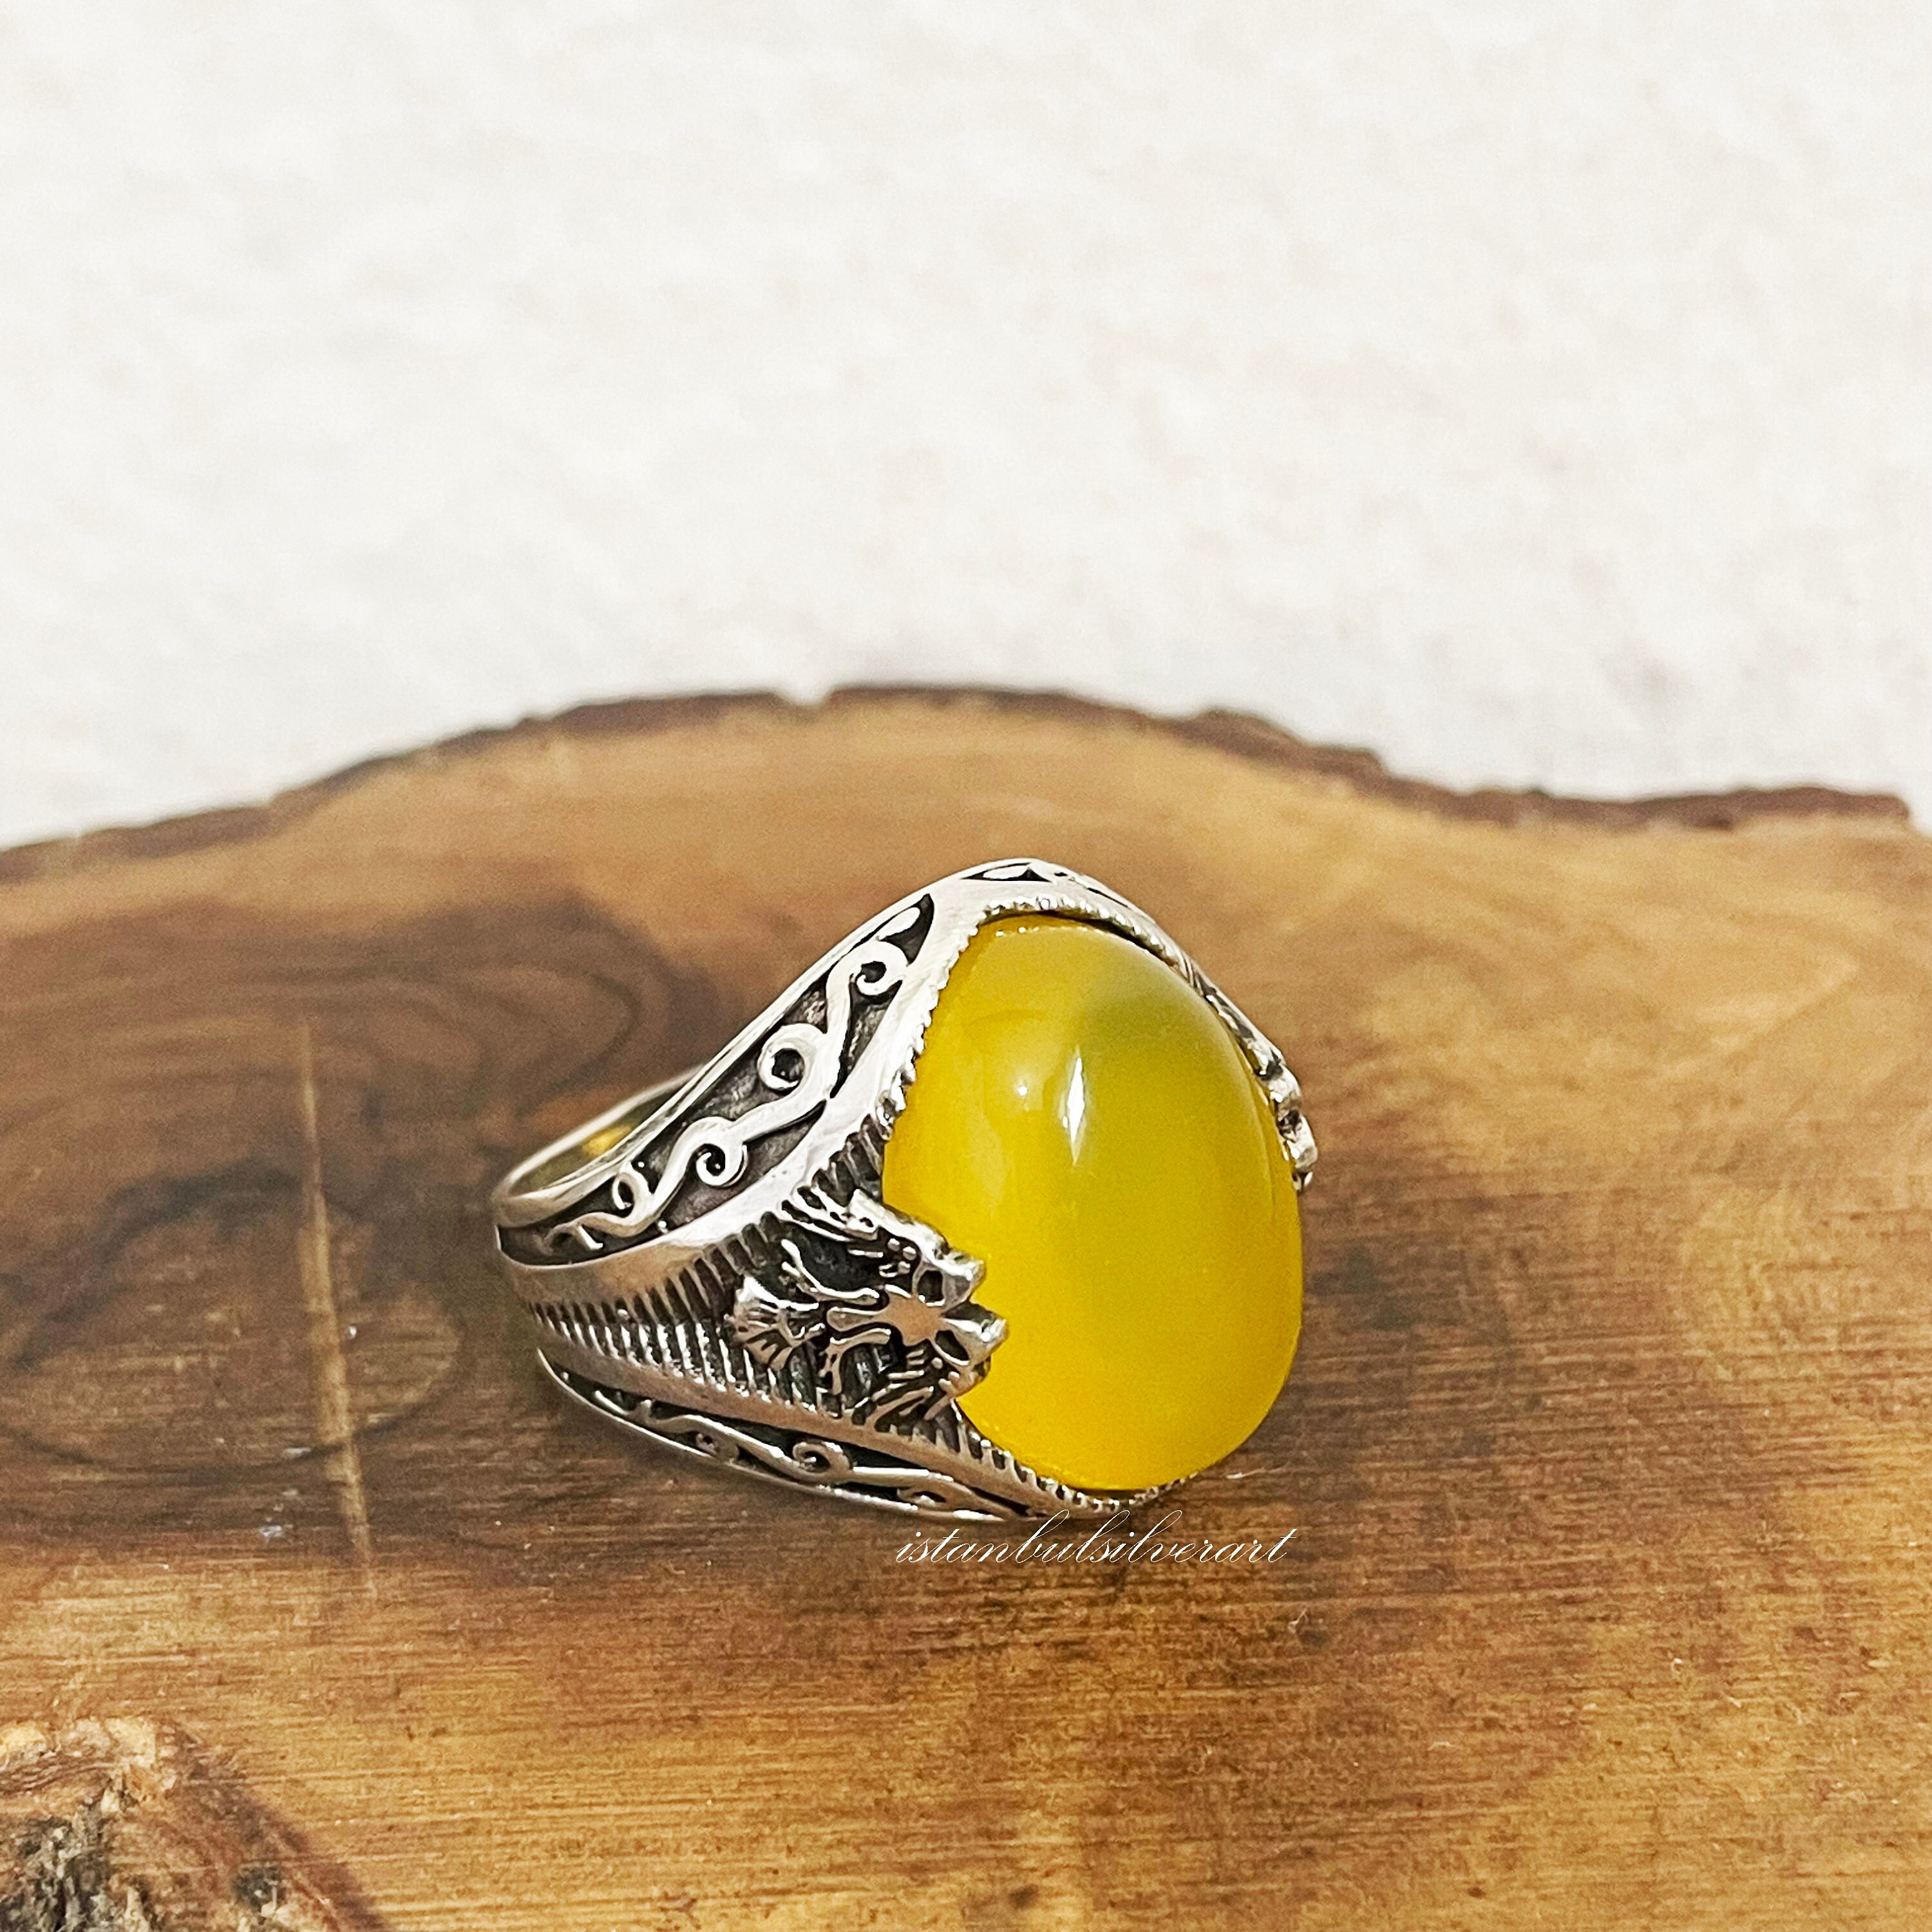 Mens Handmade Ring, Turkish Silver Men Ottoman Yellow Agate, Natural Stone, Gift For Him, 925 Sterling Ring